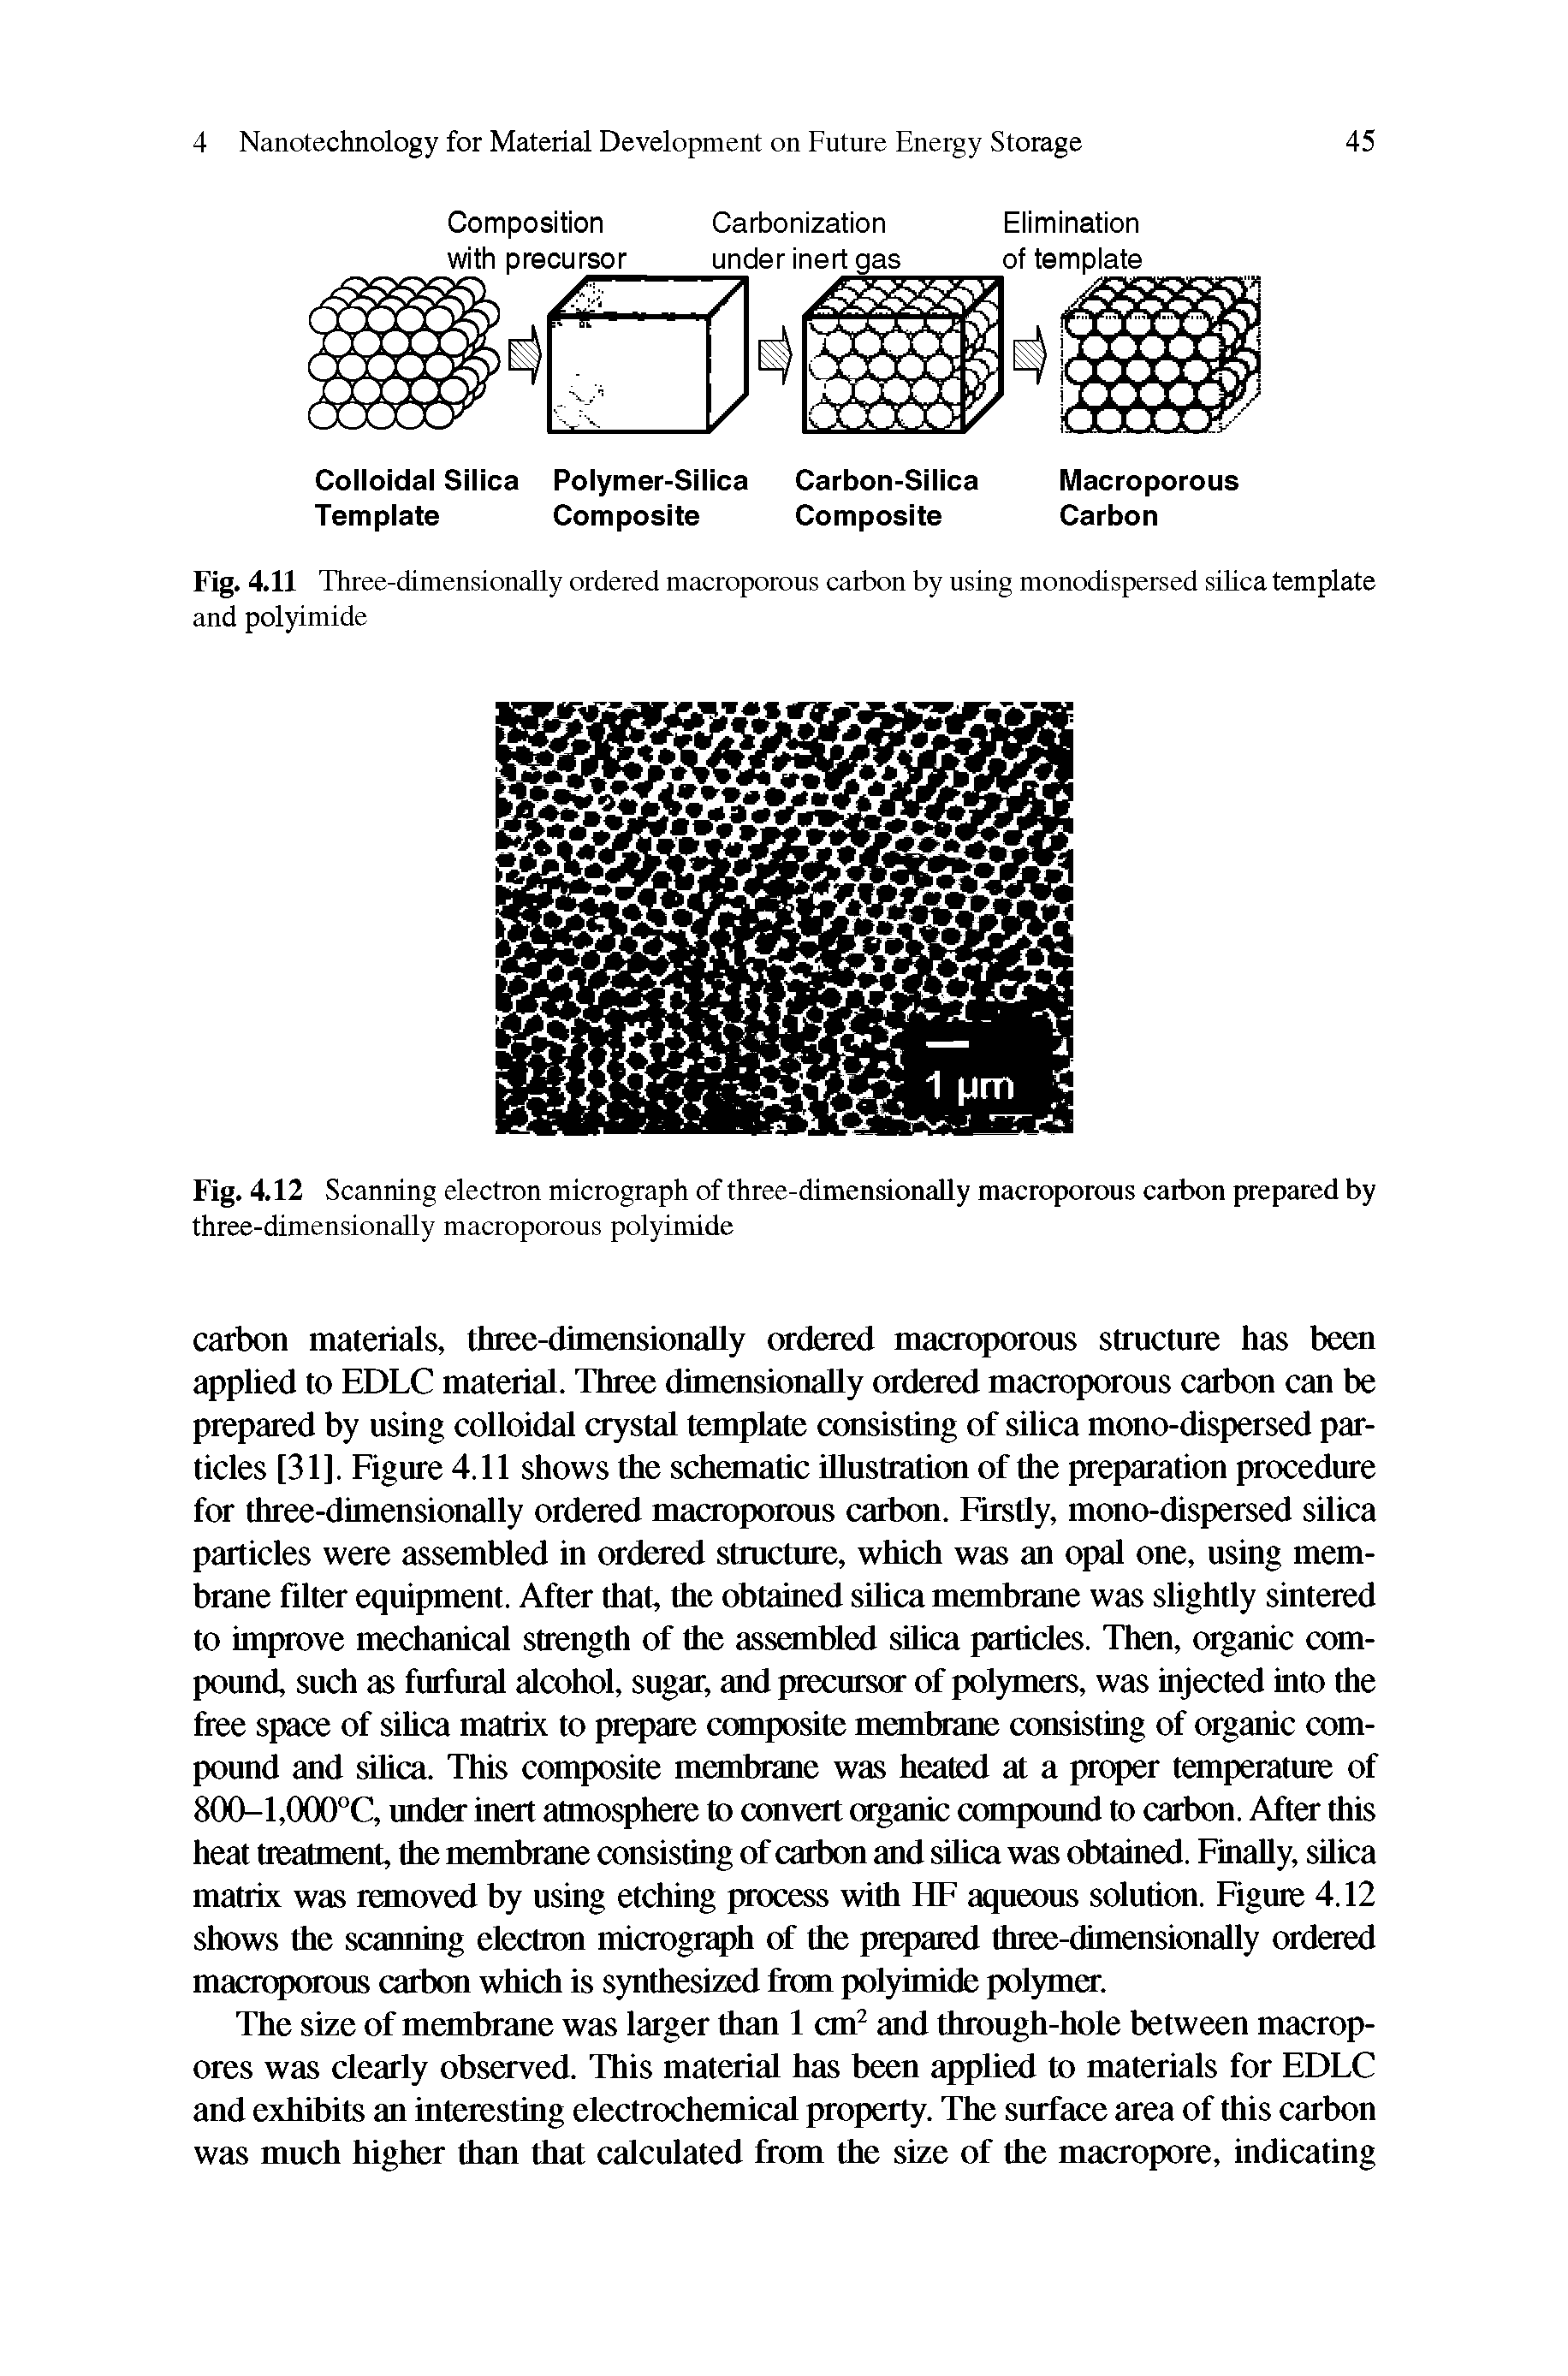 Fig. 4.12 Scanning electron micrograph of three-dimensionally macroporous carbon prepared by three-dimensionally macroporous polyimide...